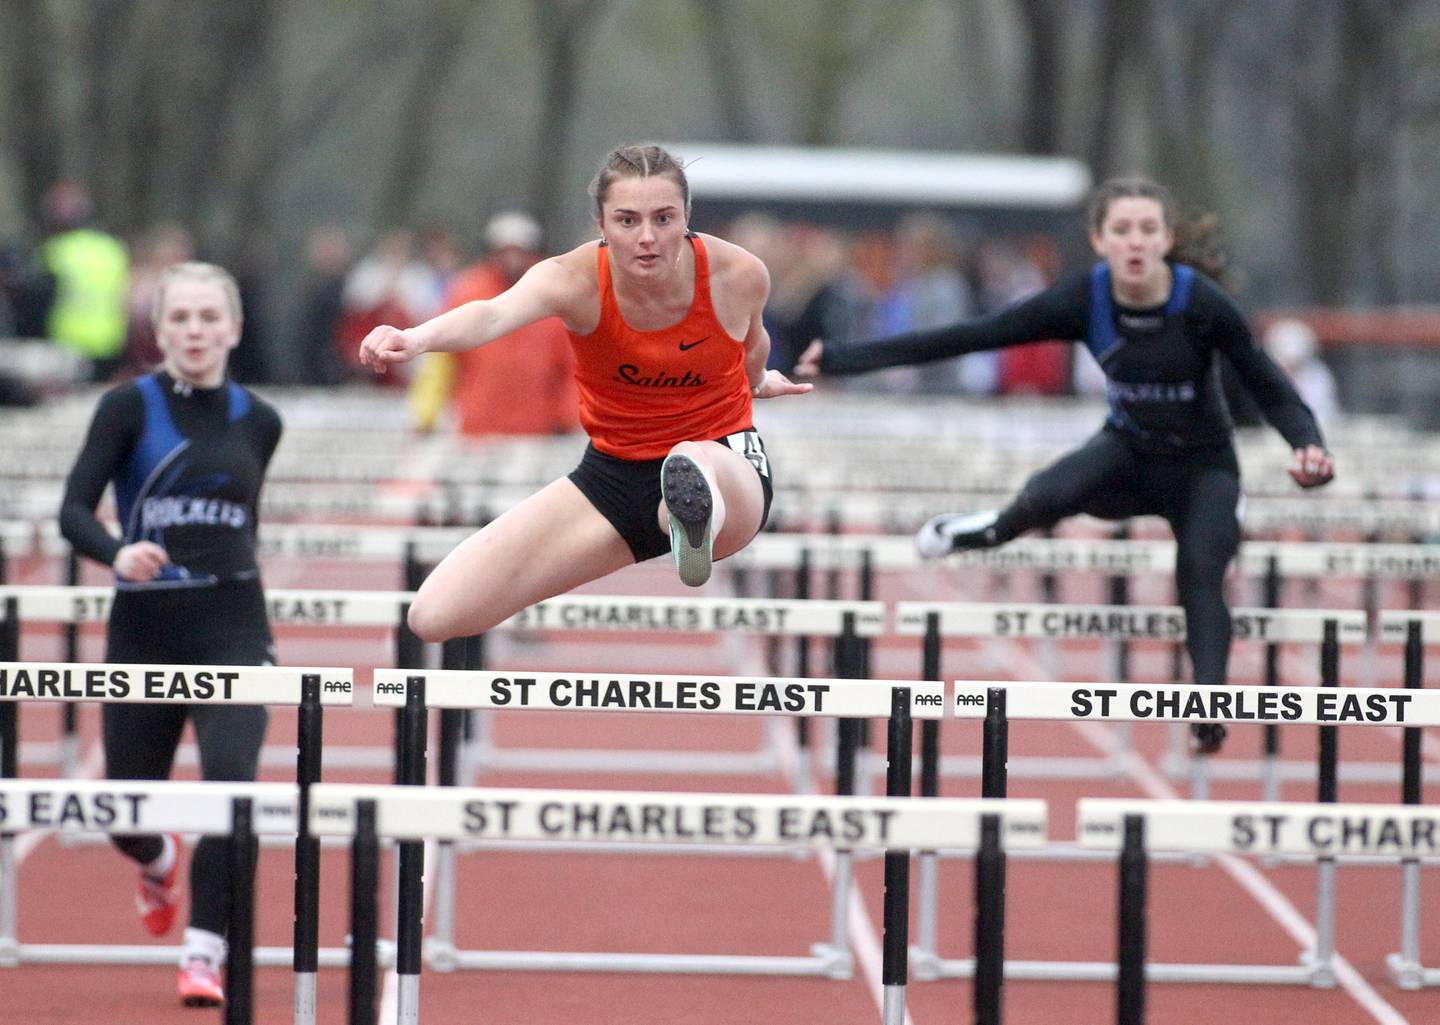 St. Charles East’s Katie Kempff competes in the 100-meter hurdles during the Kane County Girls Invite at St. Charles East on Thursday, April 28, 2022.